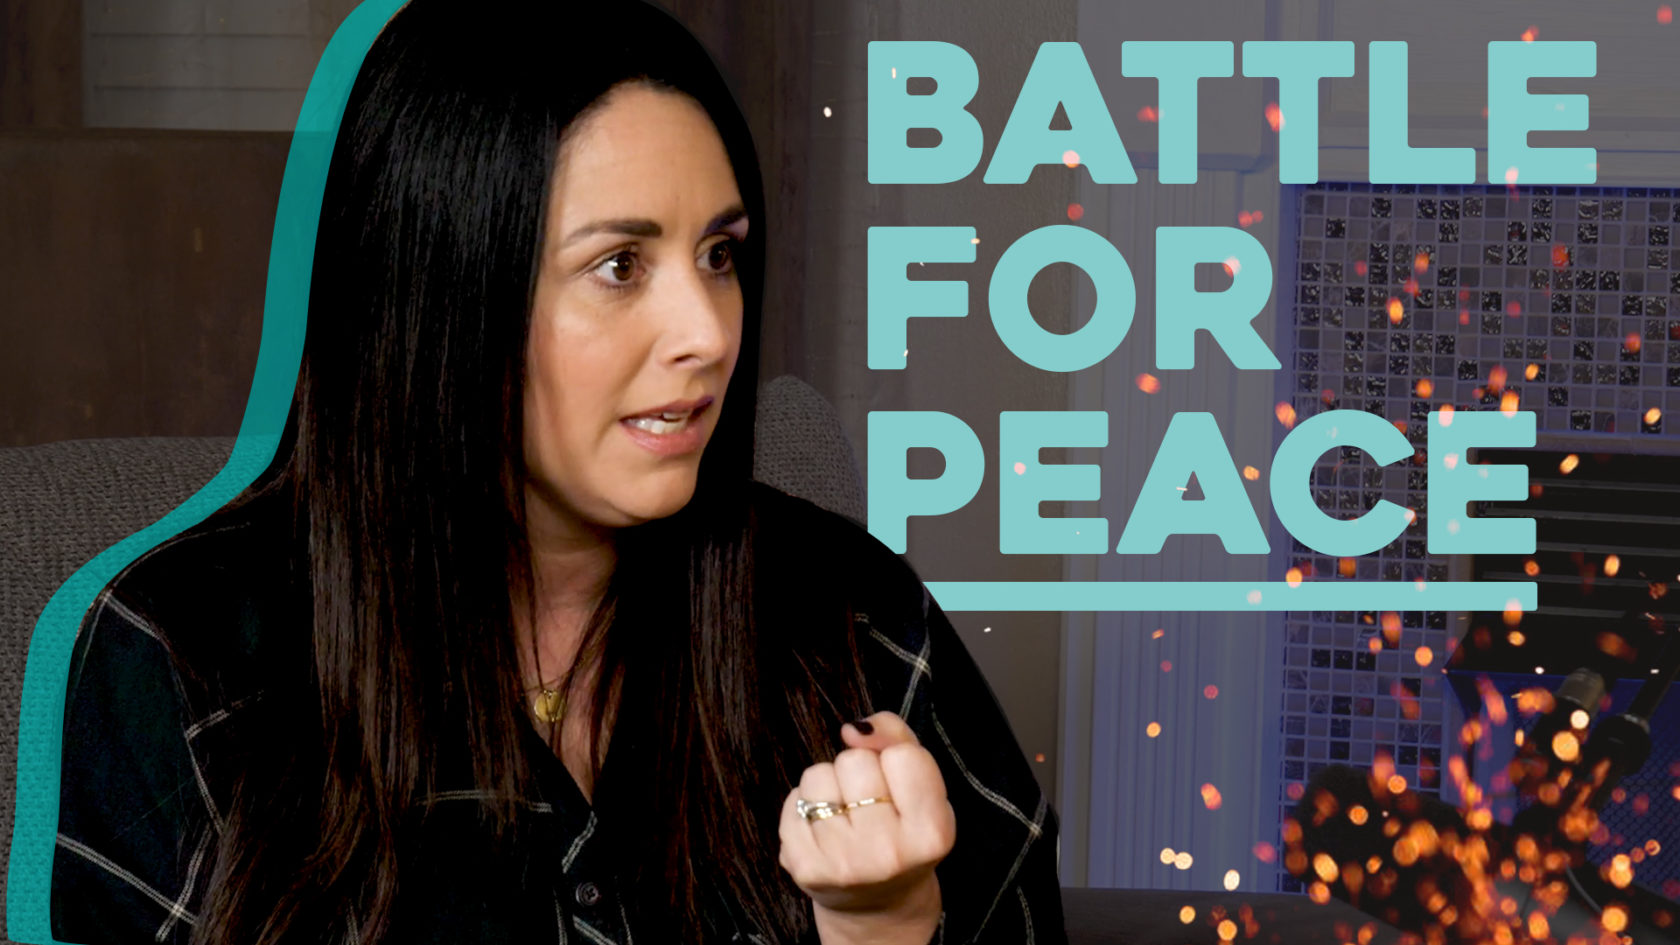 When you have to battle to find PEACE... | with Hope Darst